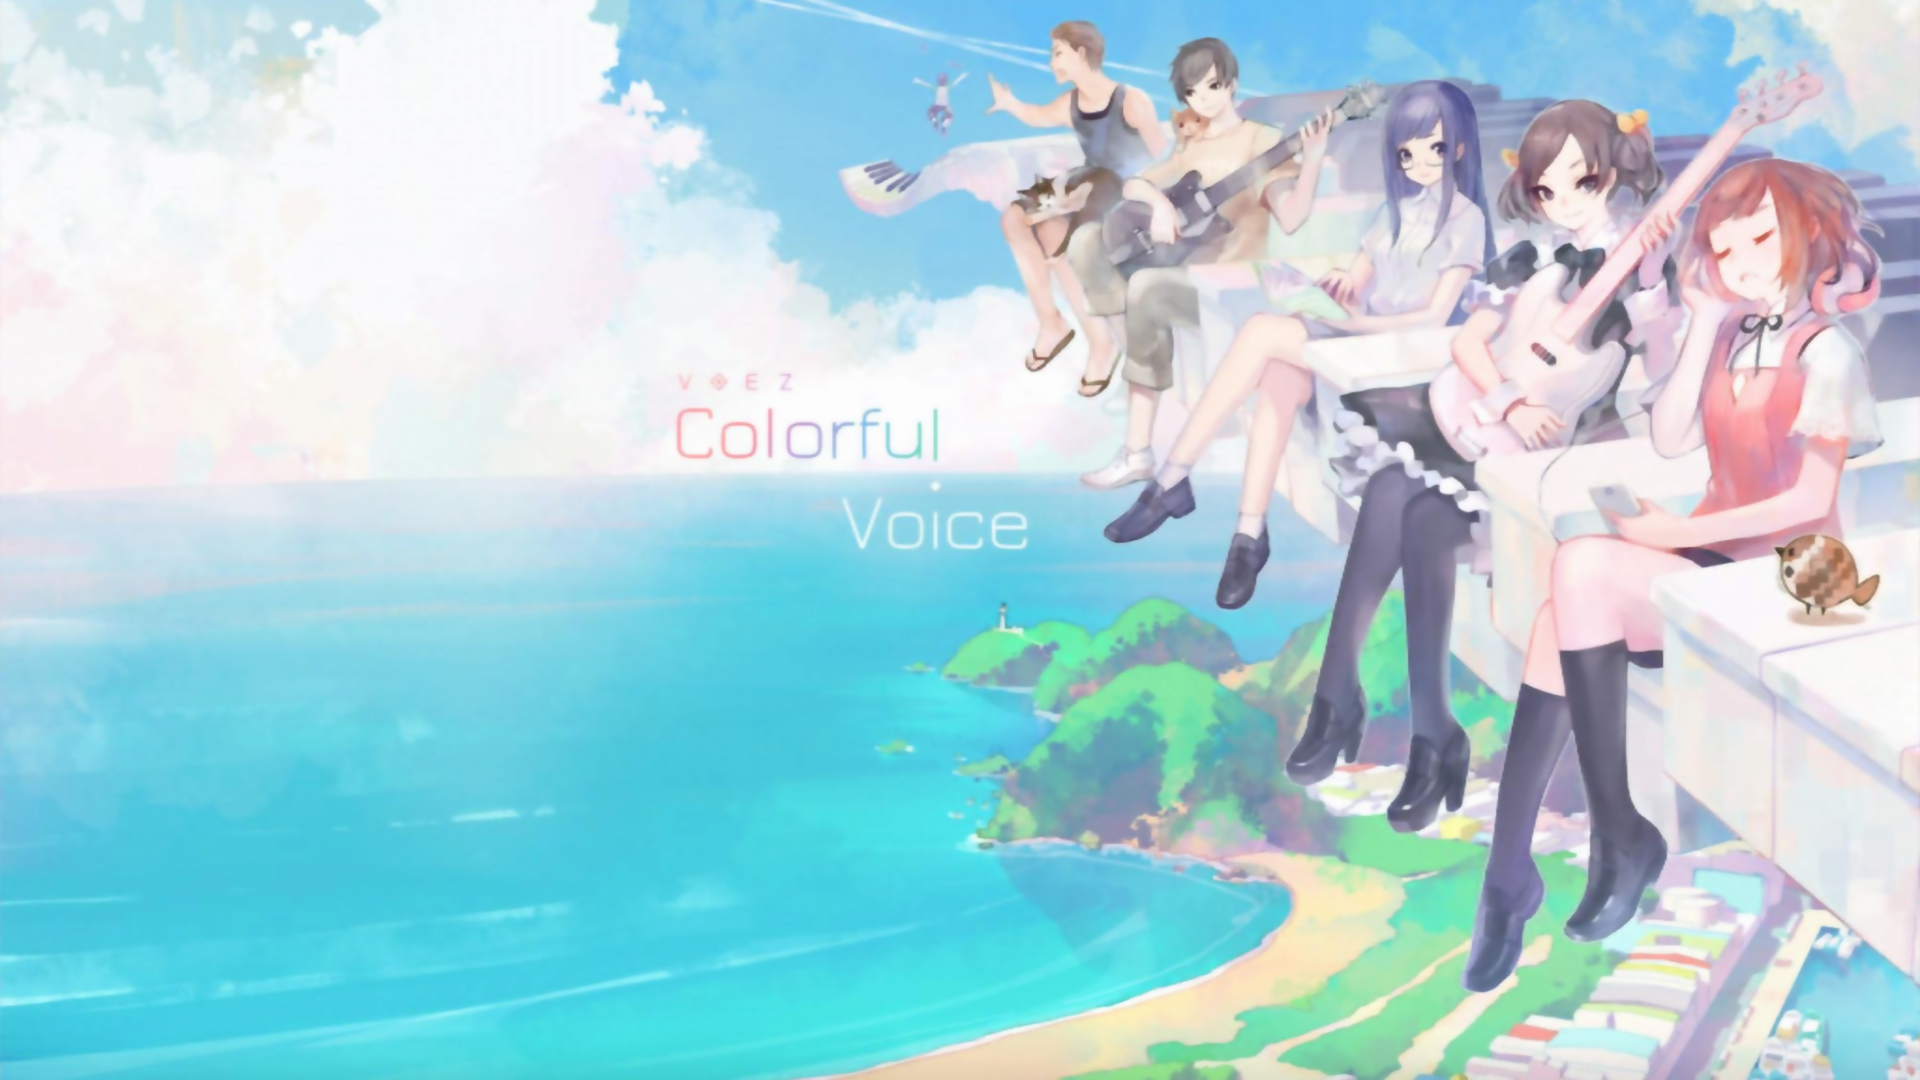 Video Game VOEZ HD Wallpaper | Background Image